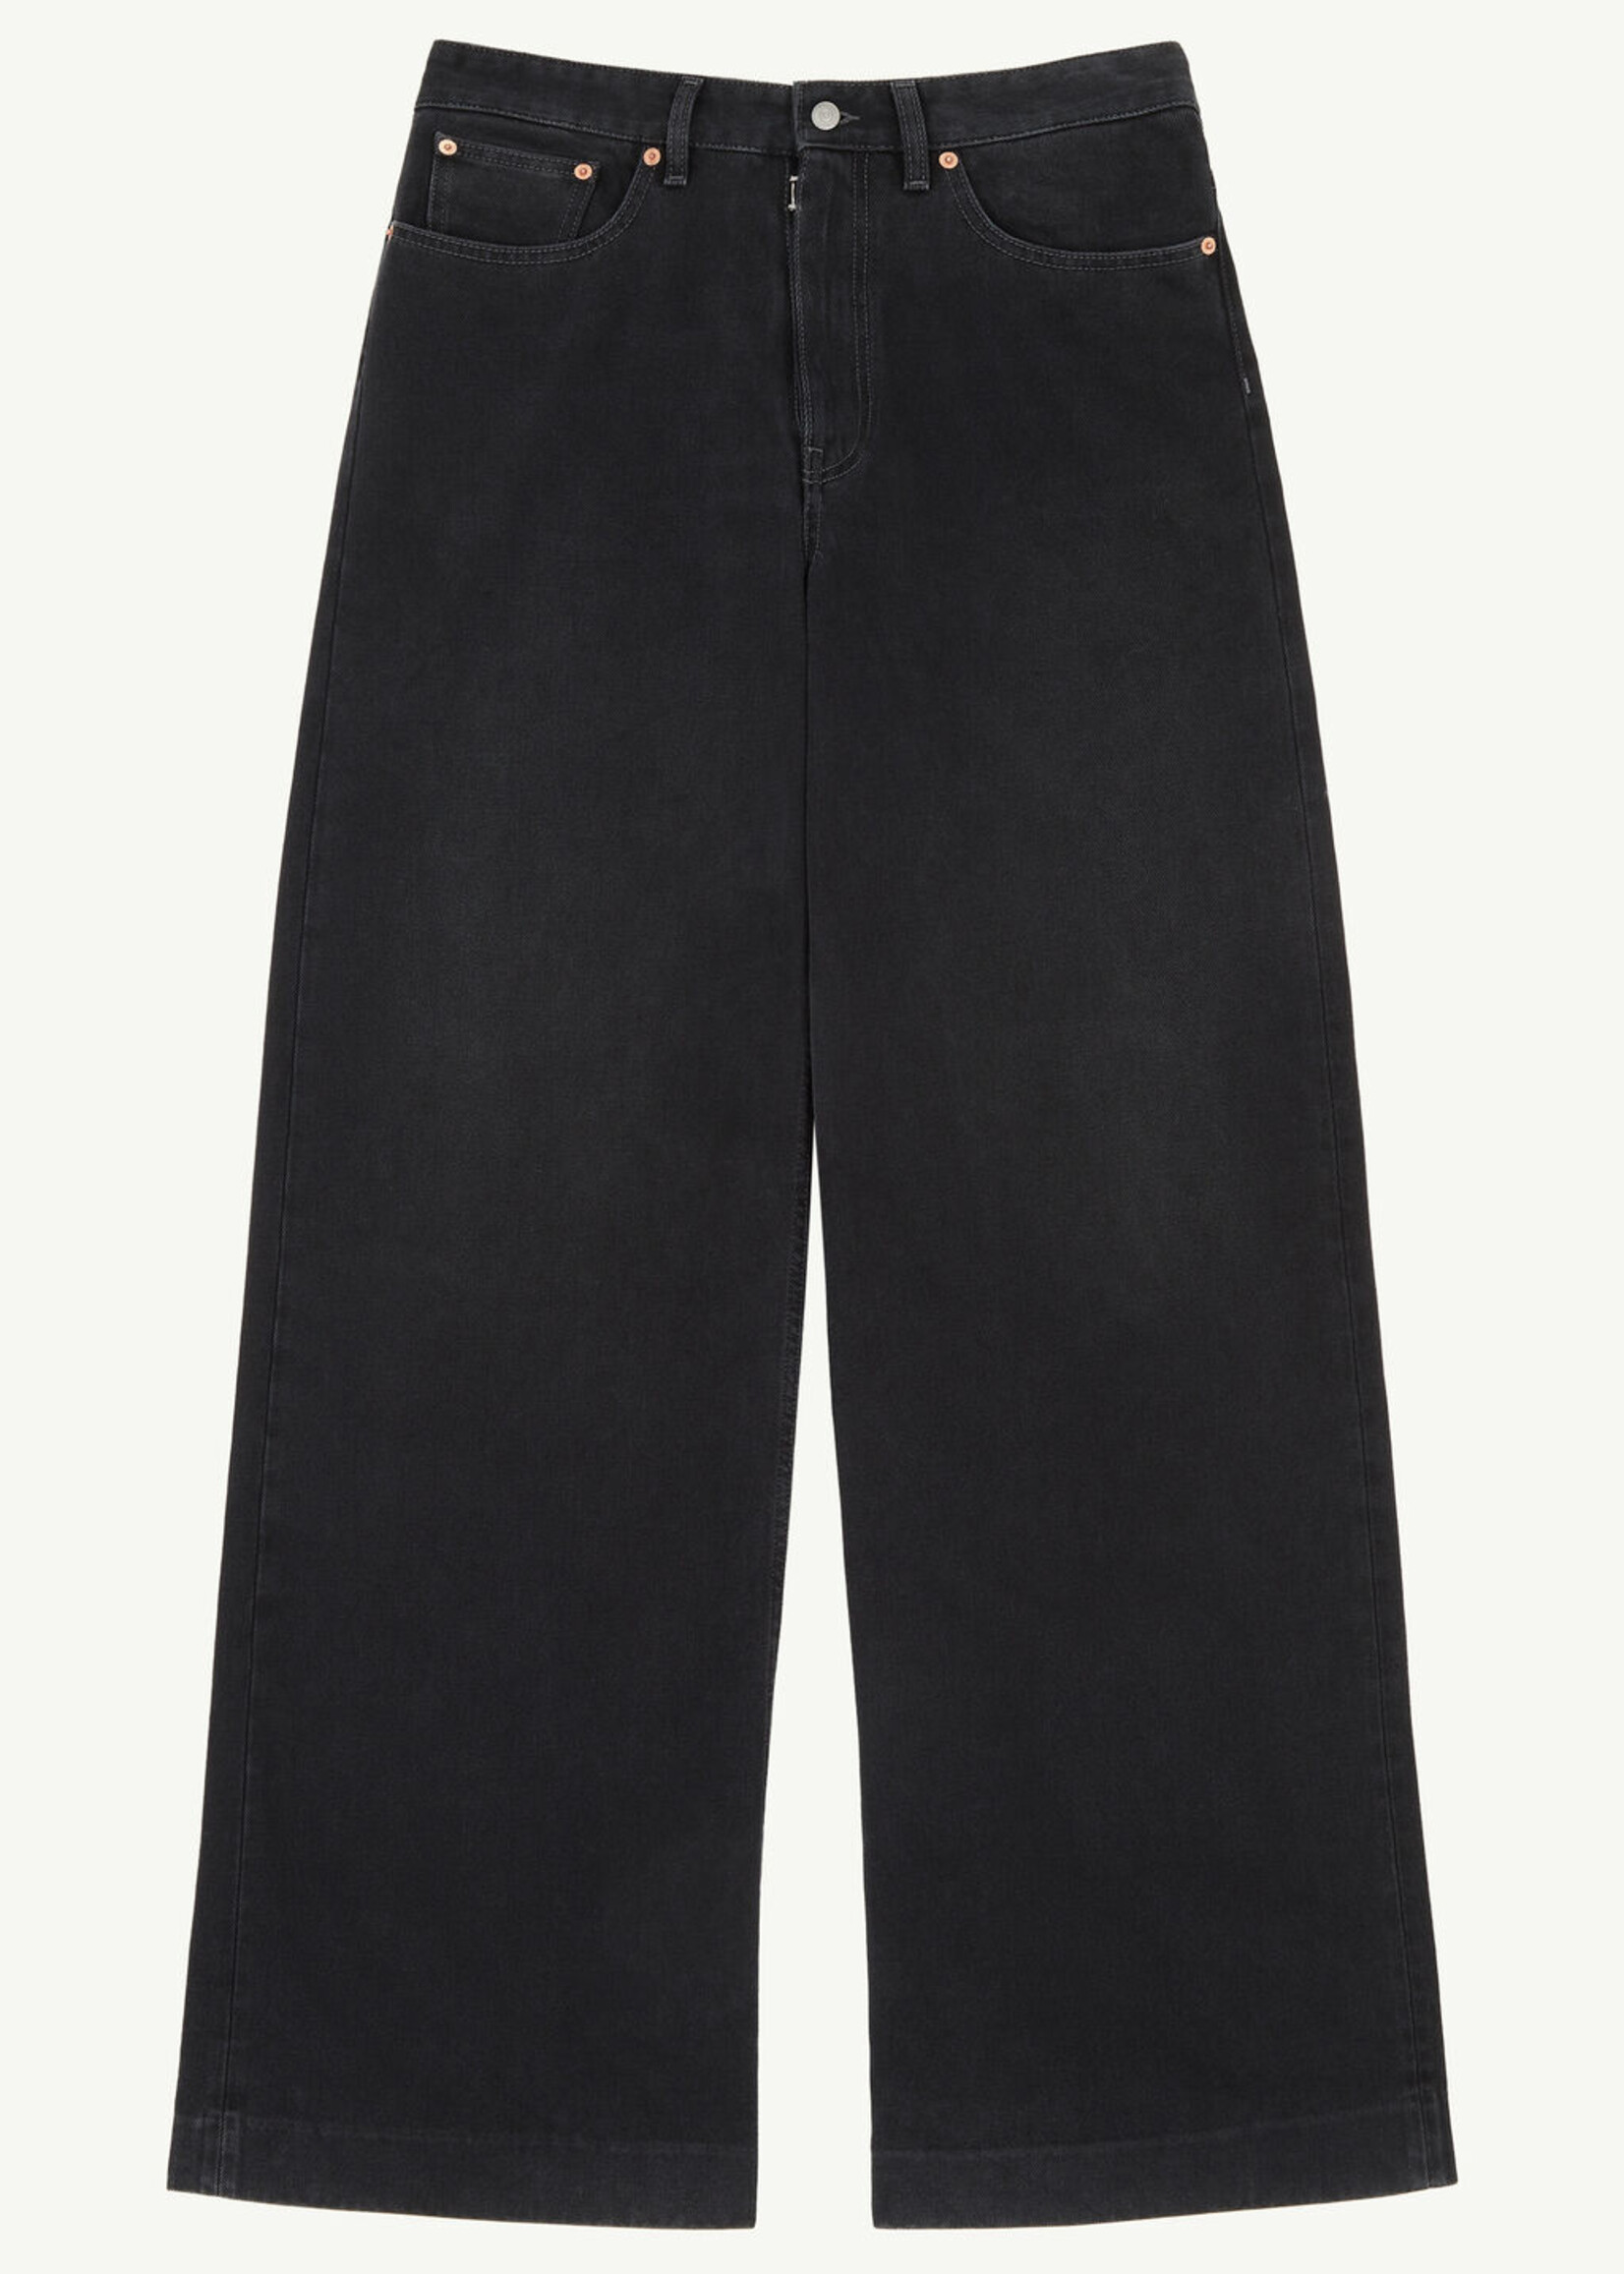 MM6 Maison Margiela Wide Leg Jeans in Black - NOW OR NEVER